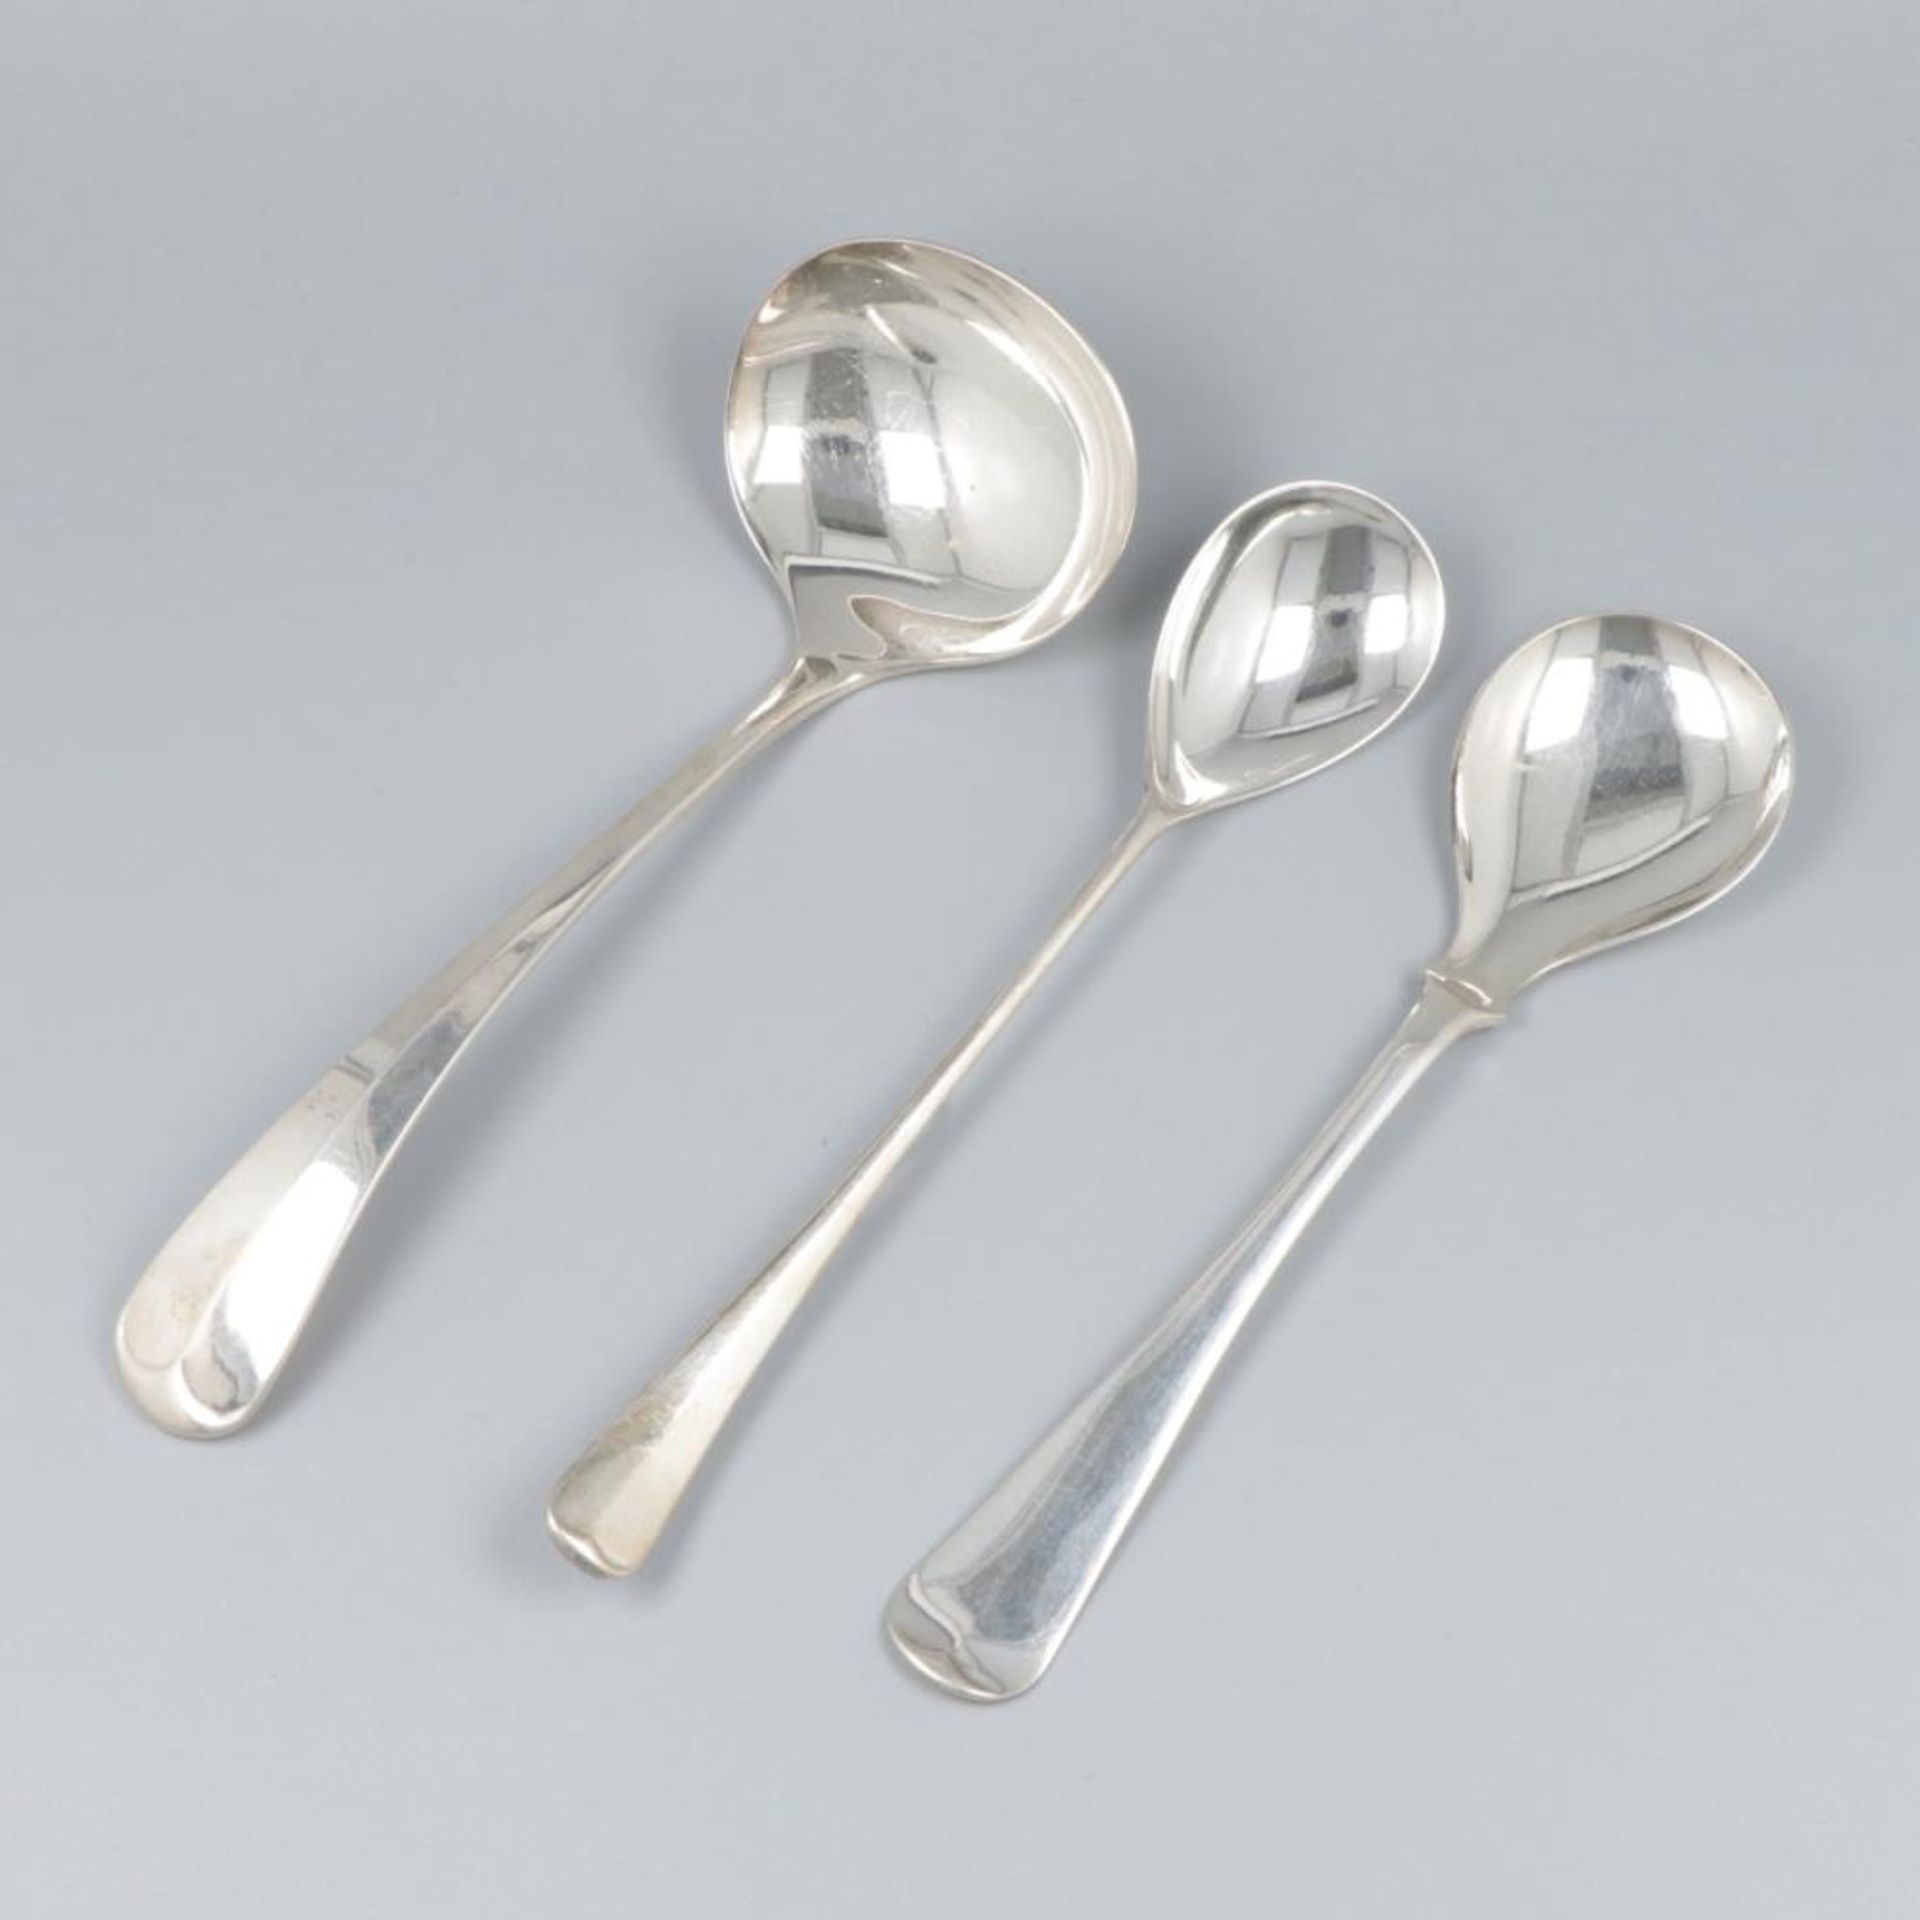 3-piece lot "Haags Lofje" silver / silver-plated spoons.